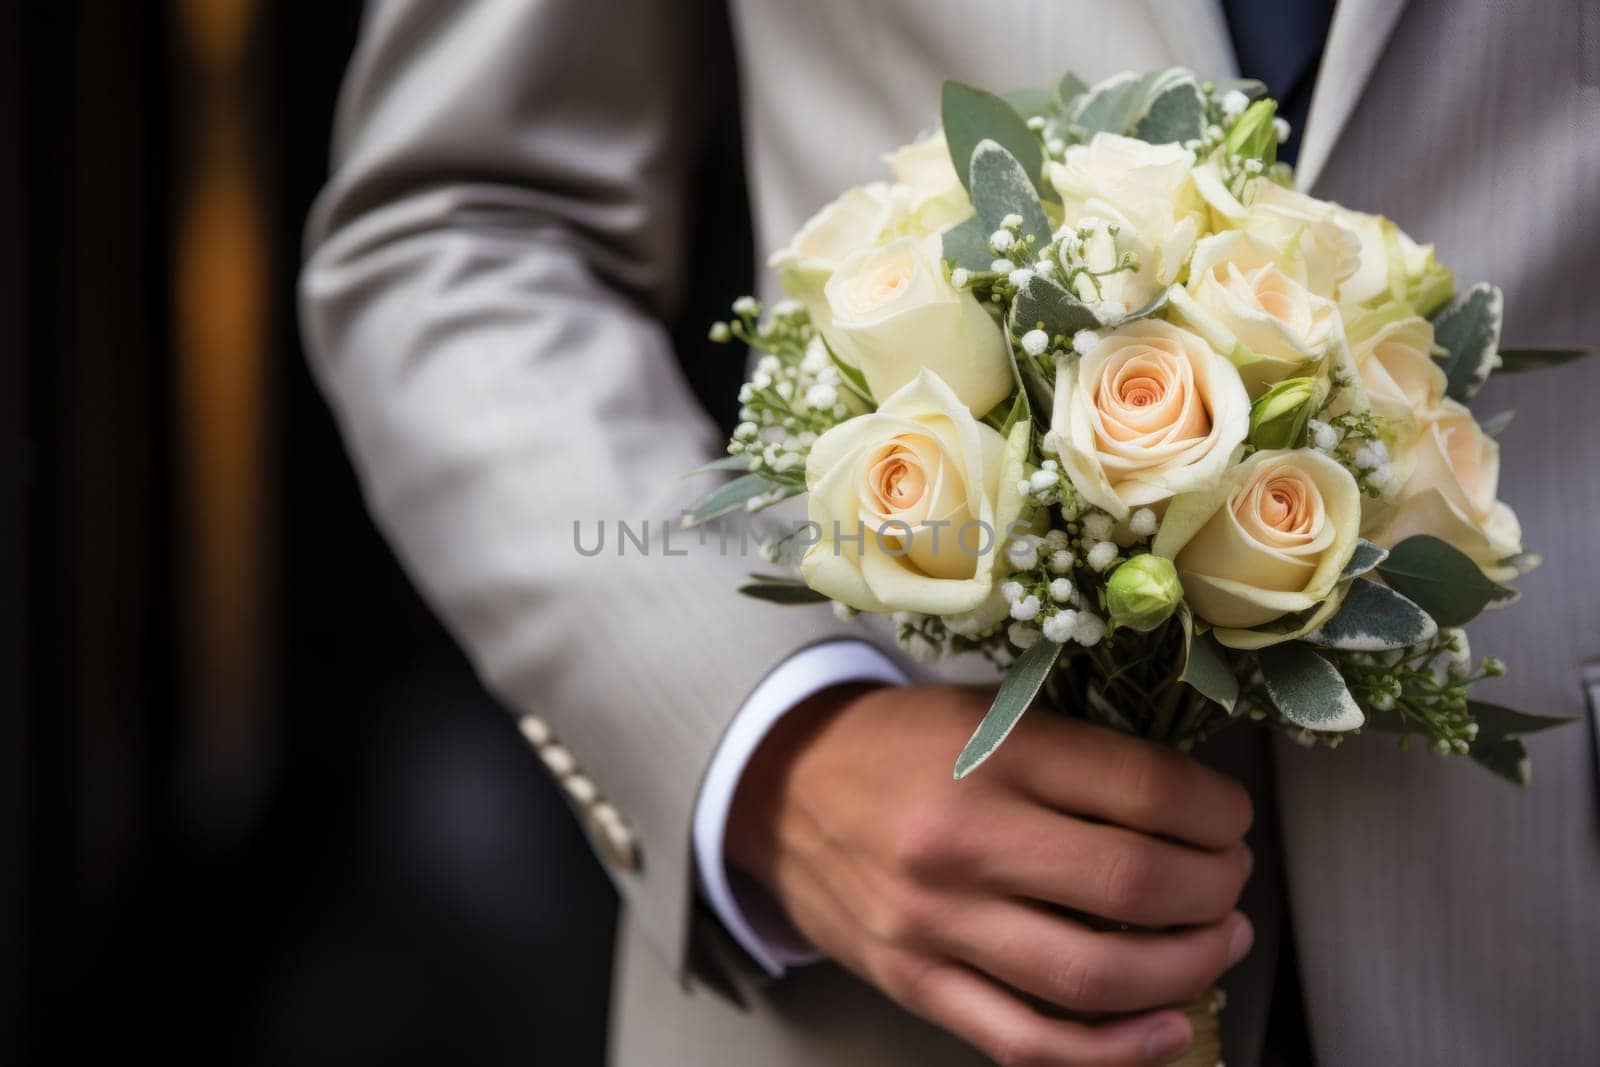 A close up of a bride's or groom's hands holding a bouquet by nijieimu